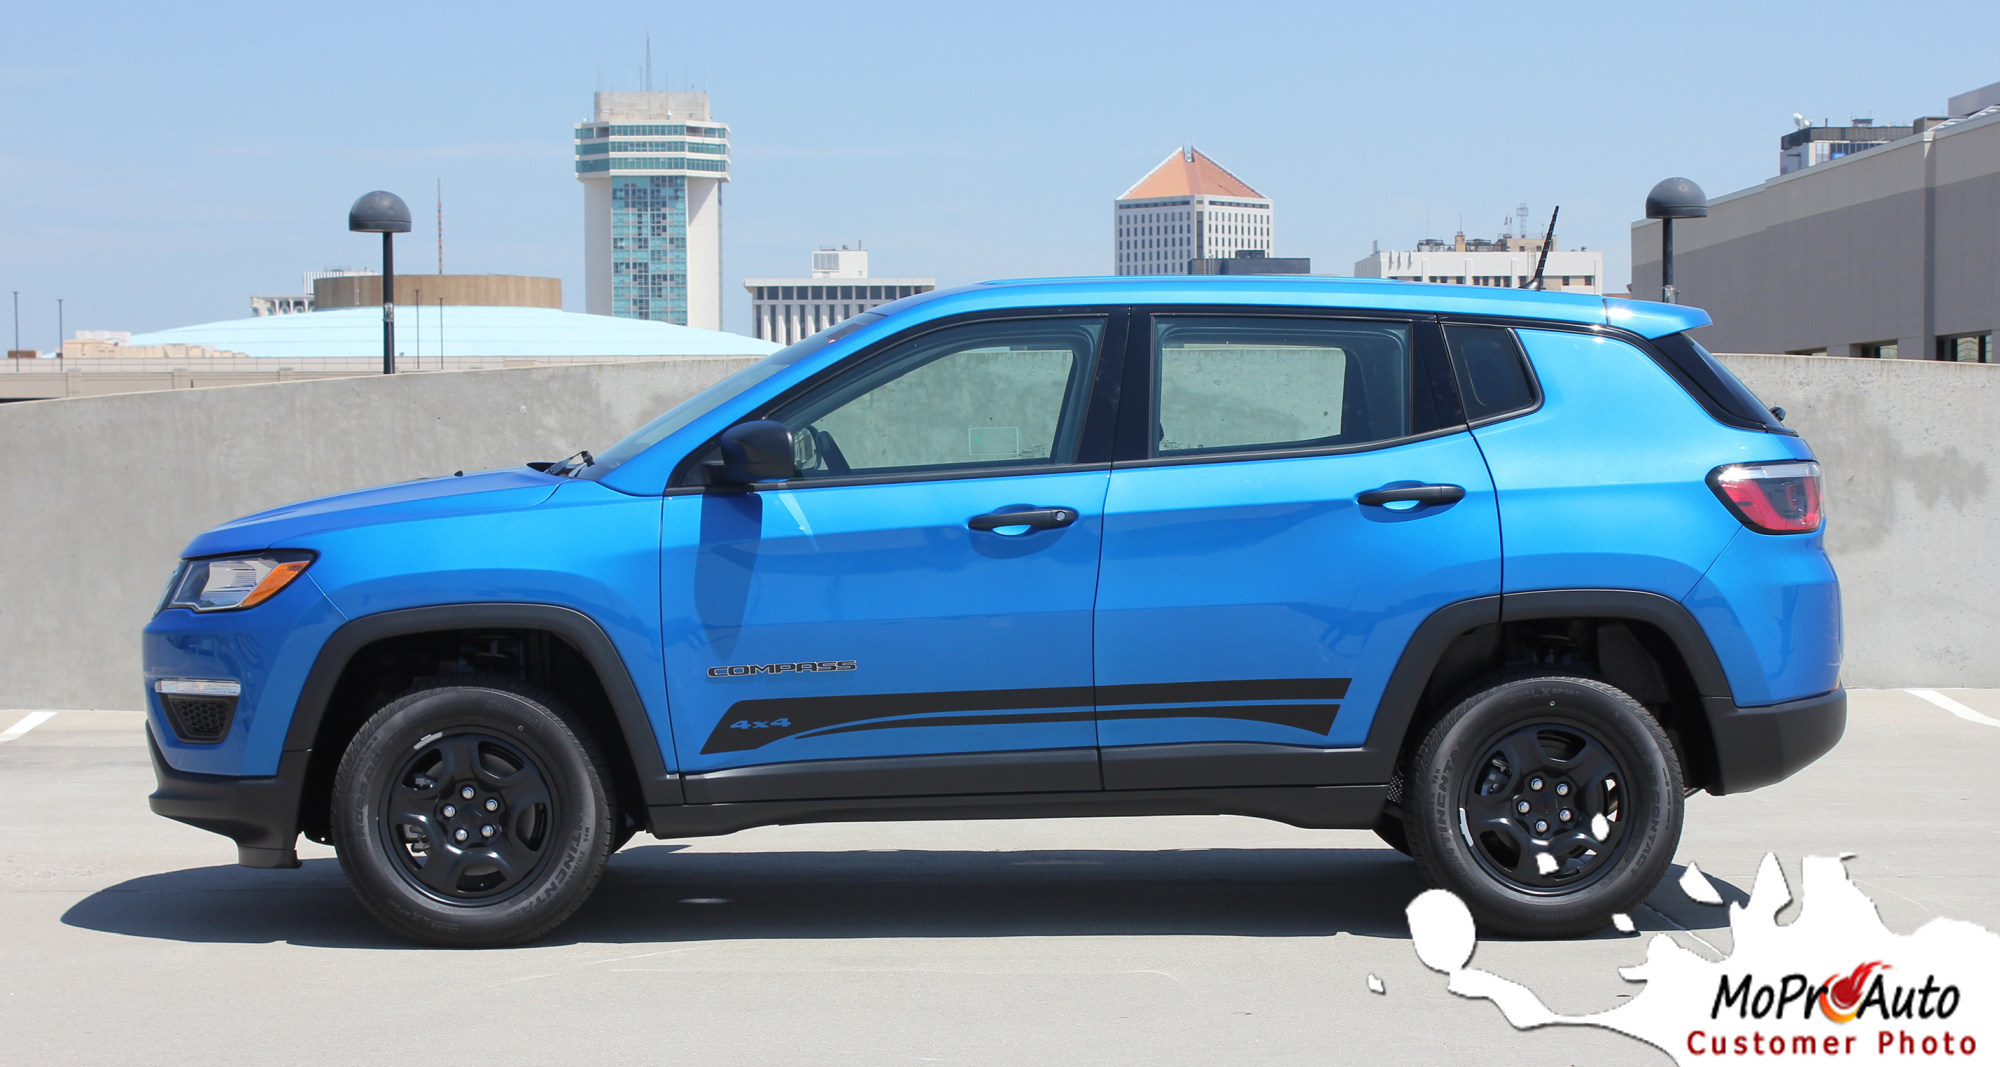 2017, 2018, 2019, 2020, 2021, 2022, 2023, 2024 Jeep Compass Vinyl Graphics Decals Stripes | Customer Photo Course